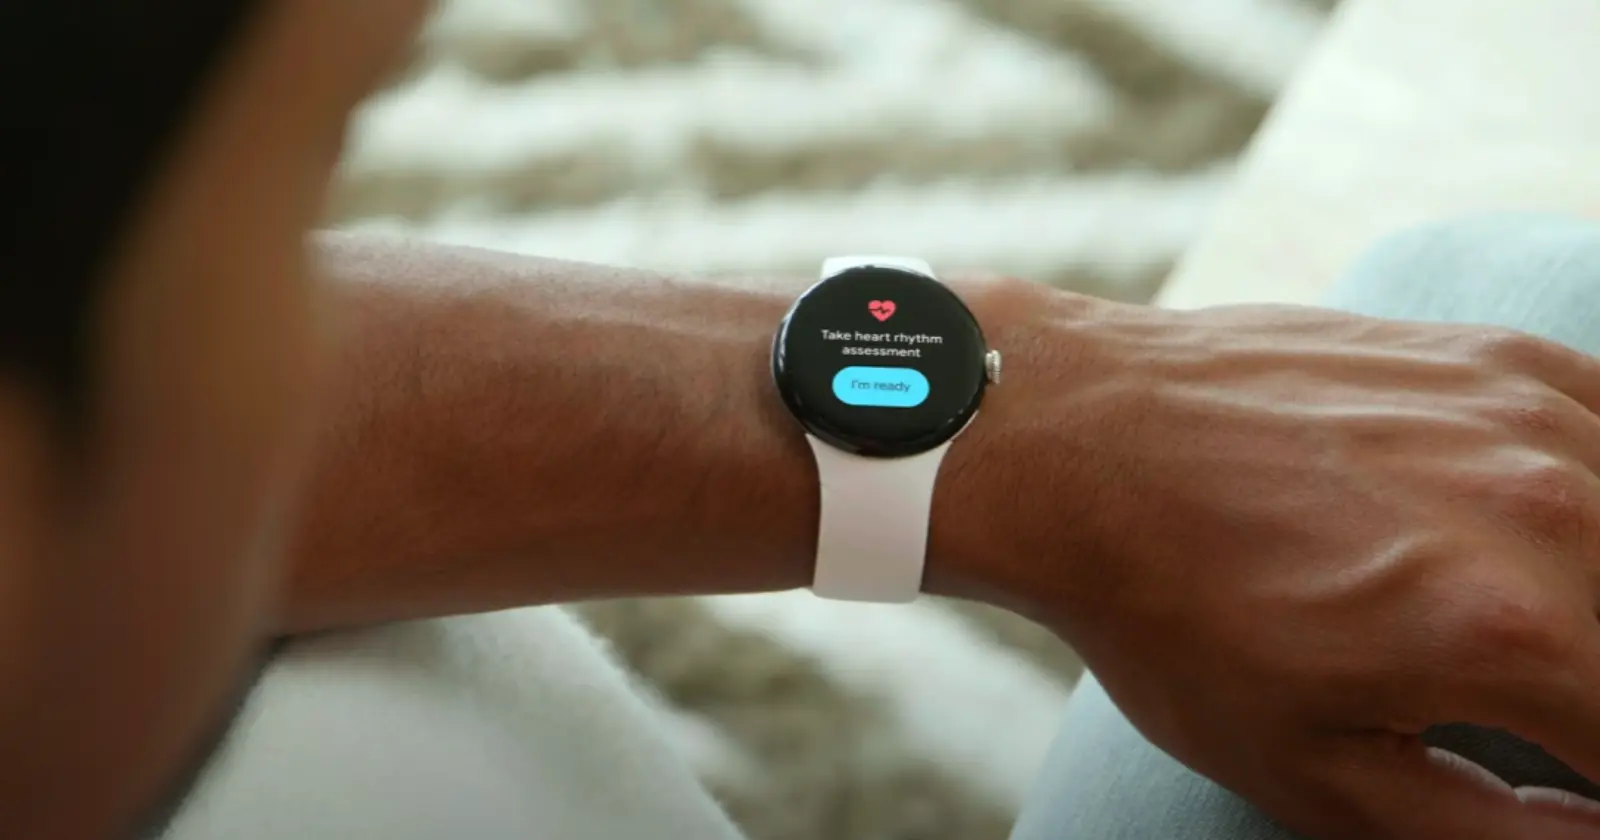 Pixel Watch finally gets support for automatic workout detection, pace and heart zone training